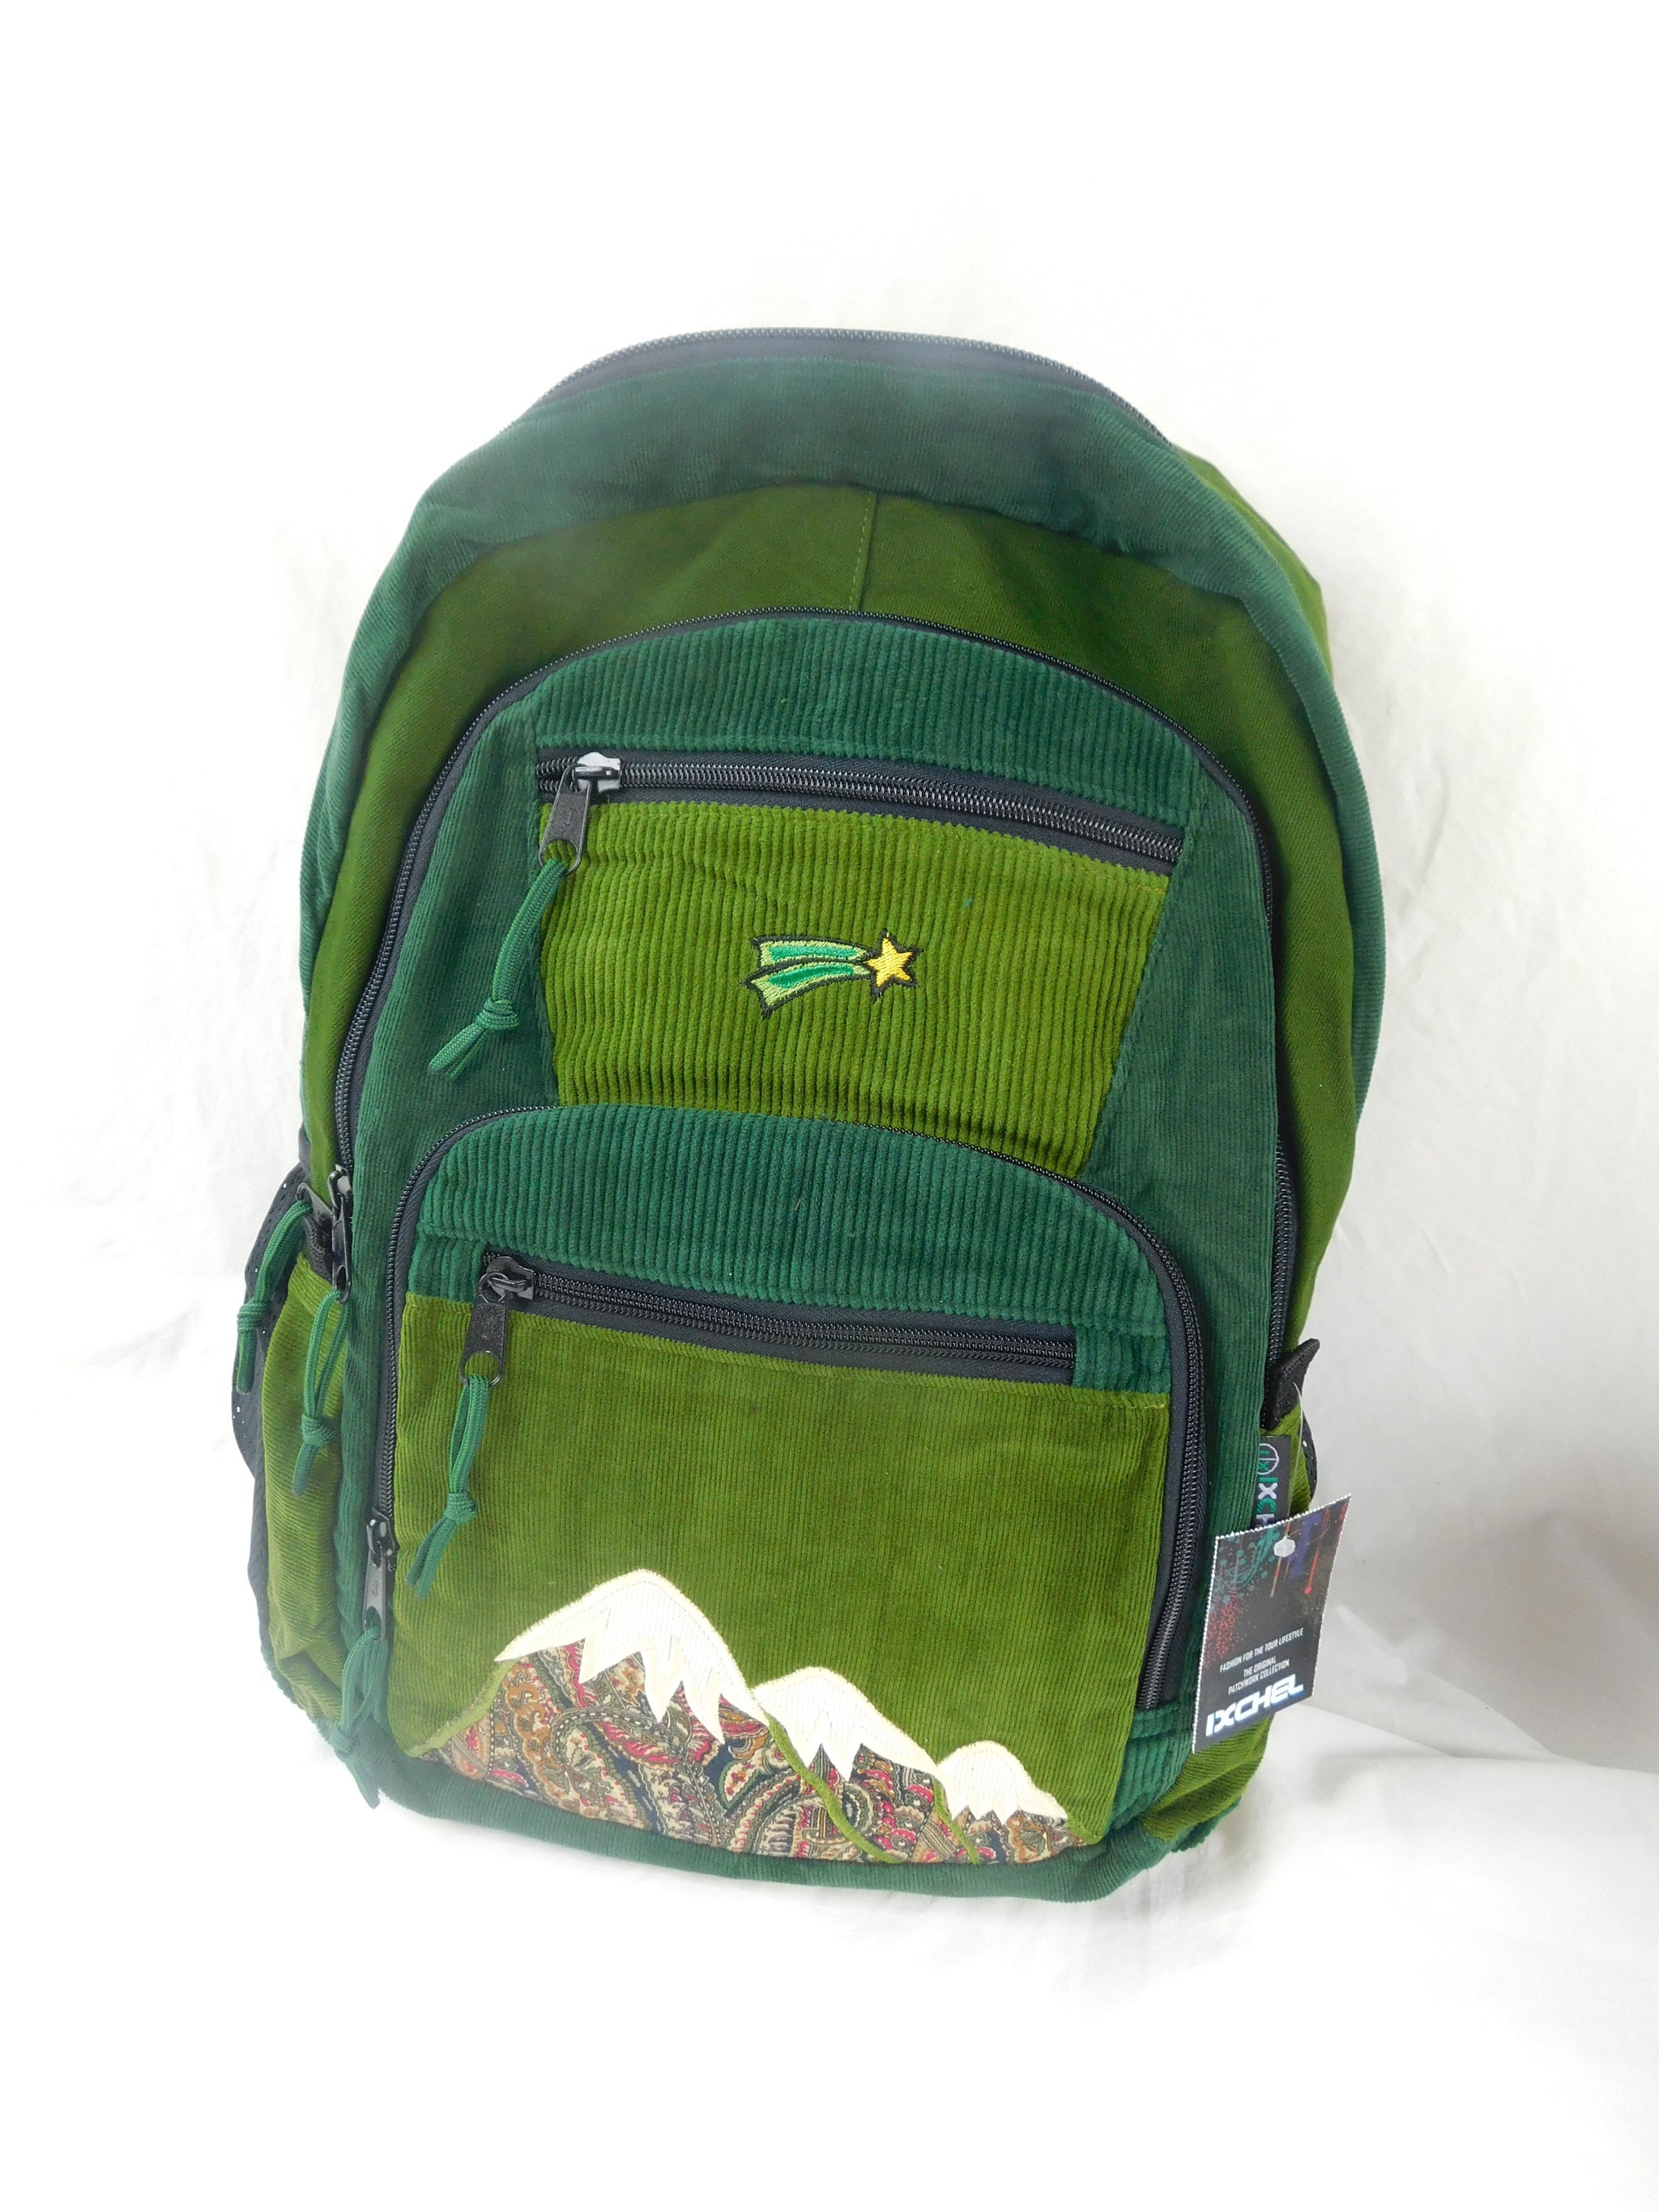 Patchwork Corduroy Backpack with Mountain Applique (Large)